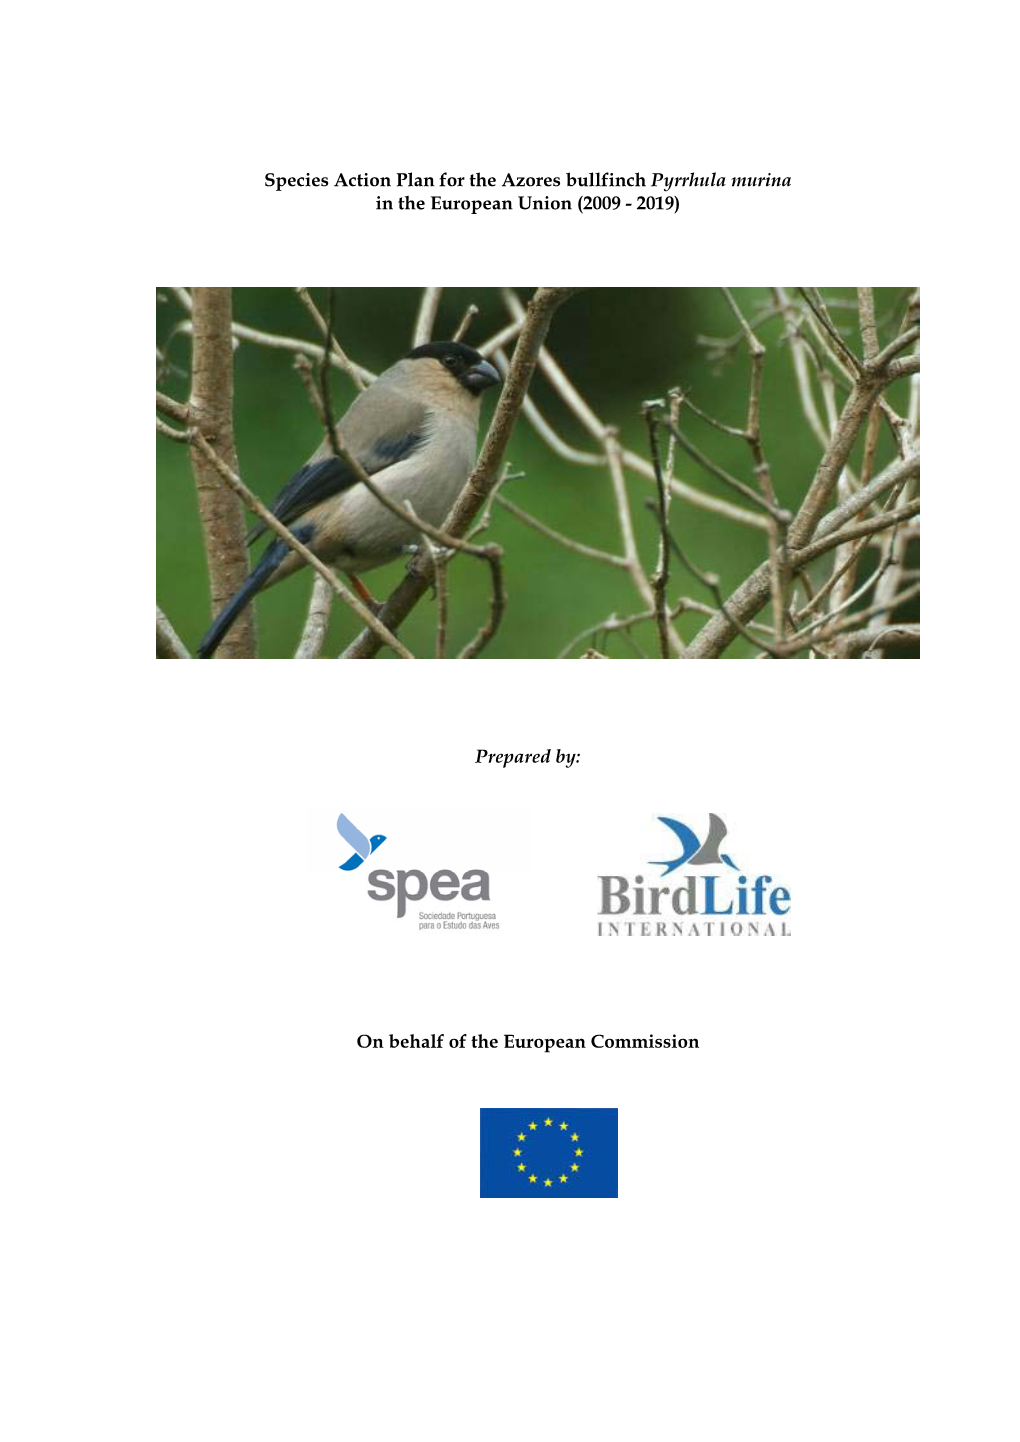 Species Action Plan for the Azores Bullfinch Pyrrhula Murina in the European Union (2009 - 2019)